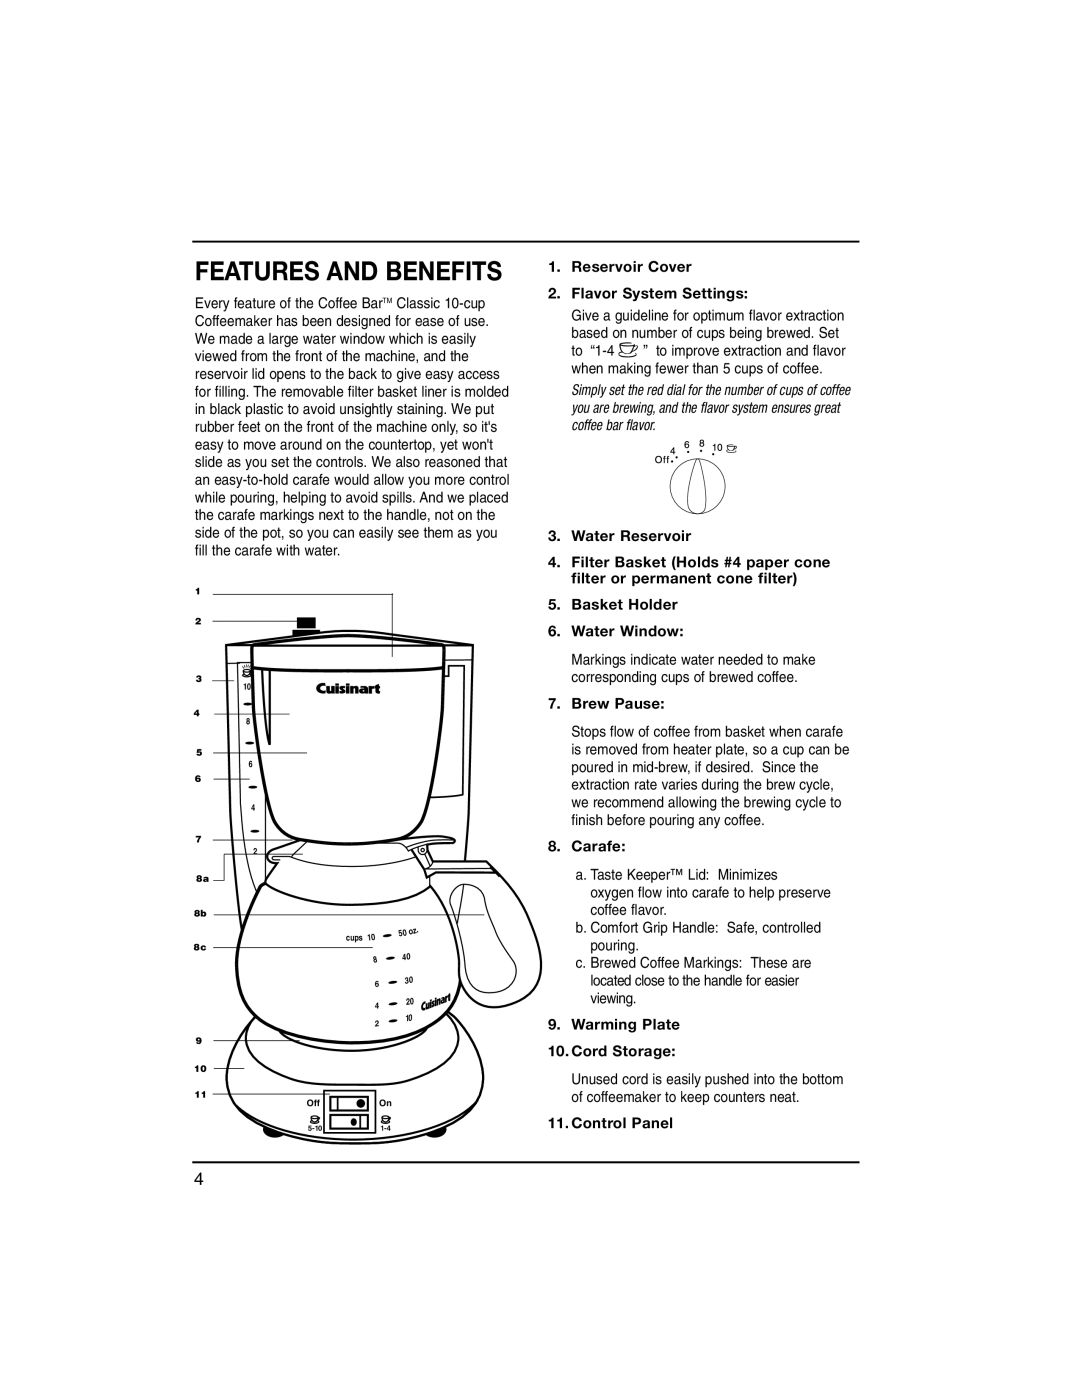 Cuisinart DCC-100C Features And Benefits, Reservoir Cover 2. Flavor System Settings, Water Reservoir, Brew Pause, Carafe 